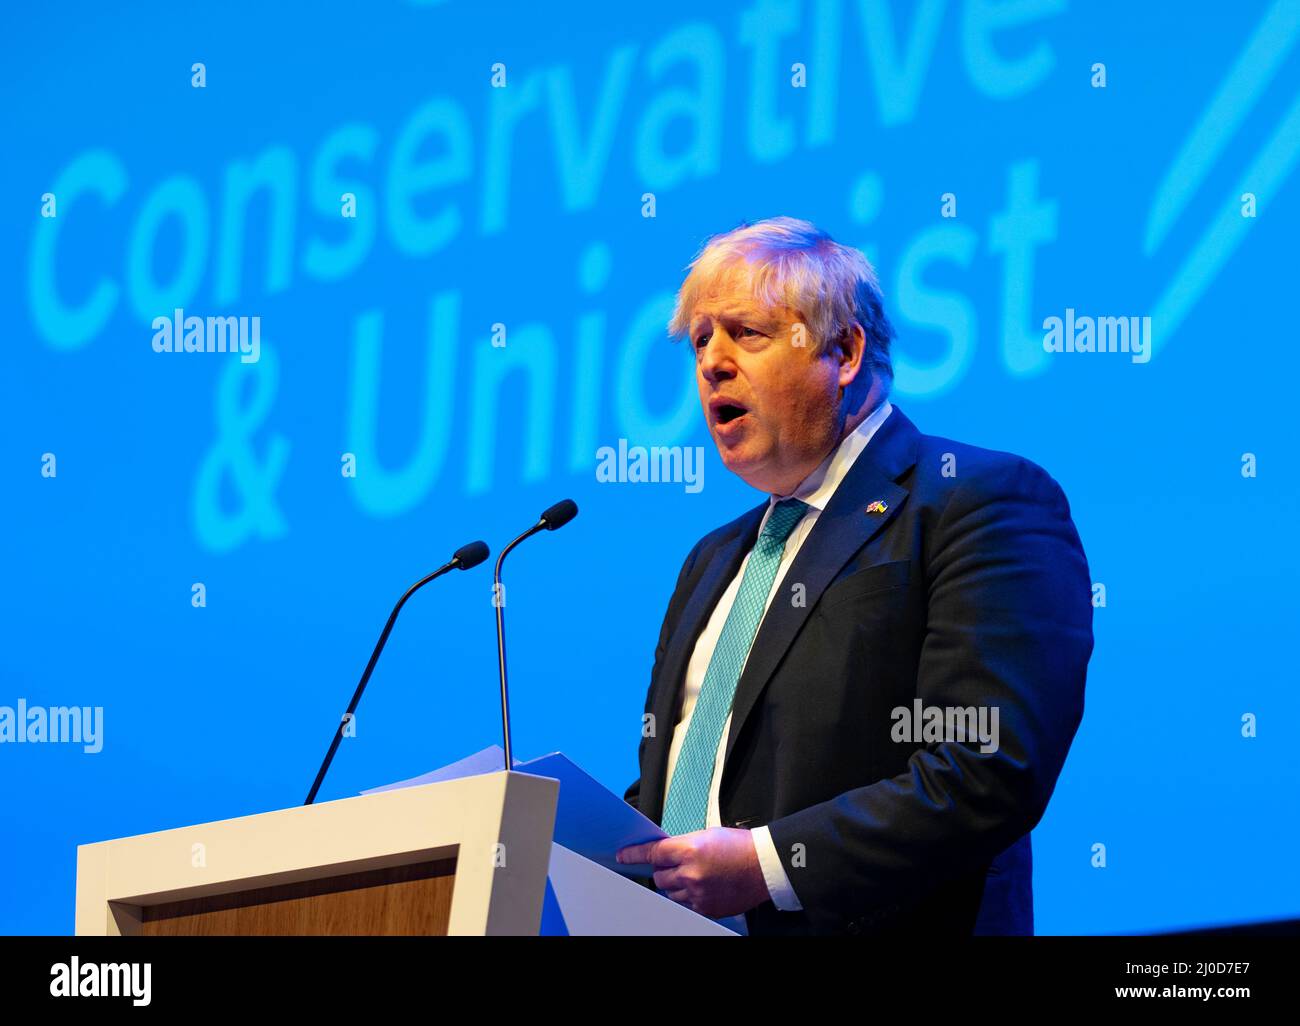 Aberdeen, Scotland, UK. 18th March 2022.   Prime Minister Boris Johnson keynote speech at Scottish Conservative party Conference 2022 at P&J conference venue in Aberdeen, Scotland. Iain Masterton/Alamy Live News Stock Photo